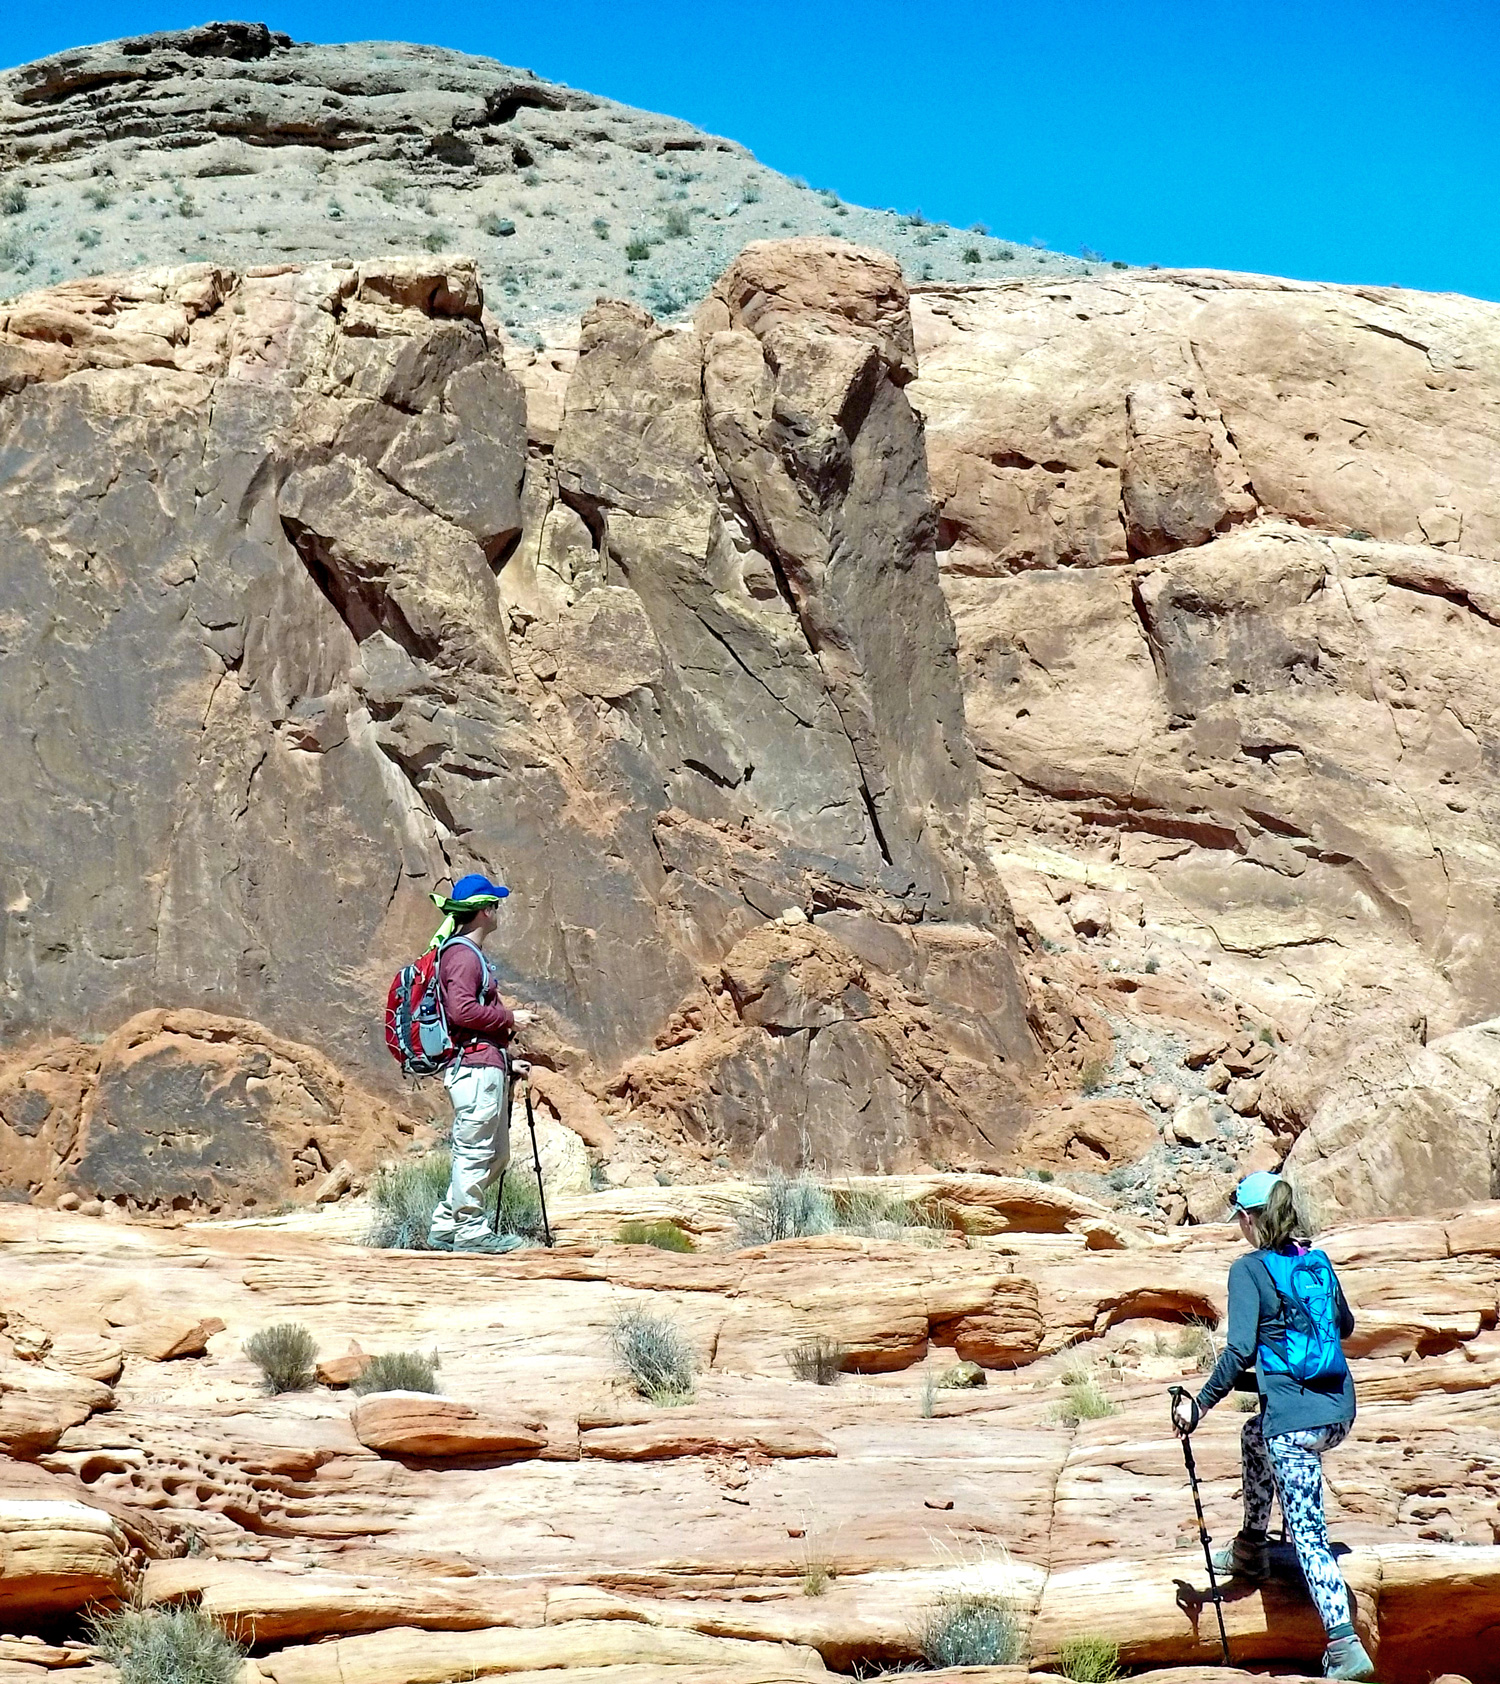 A man and woman with hiking poles and backpacks